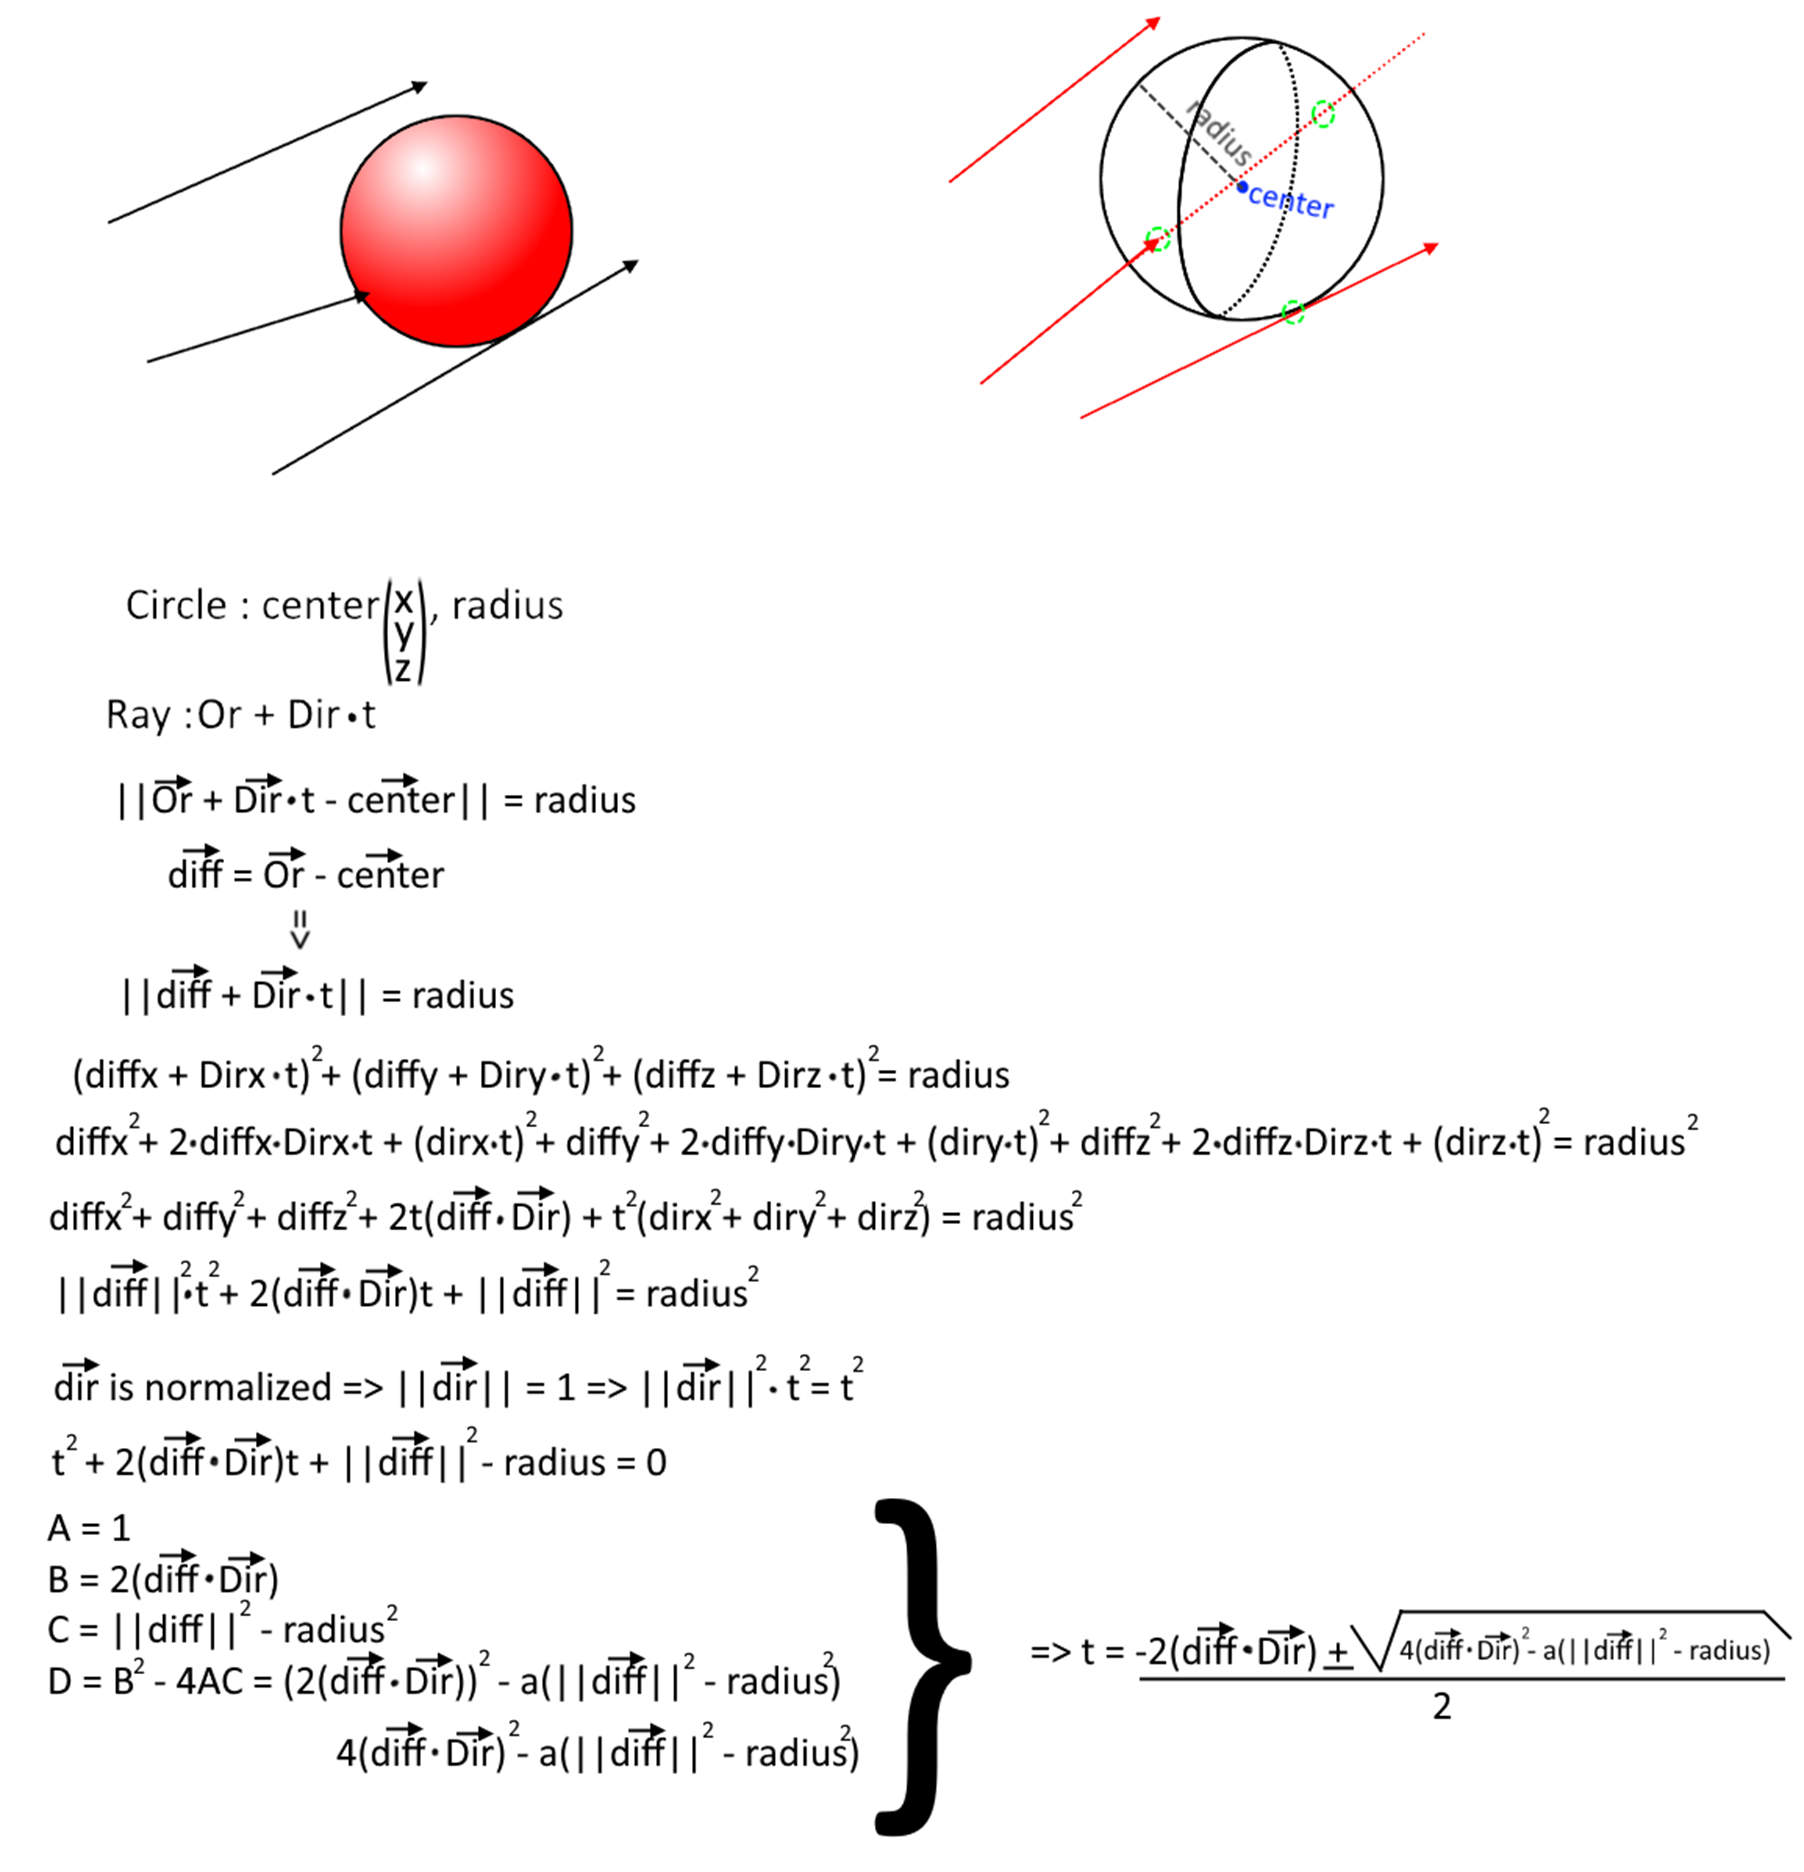 Digitalized version of the notes I wrote to figure out the math behind ray-sphere intersection